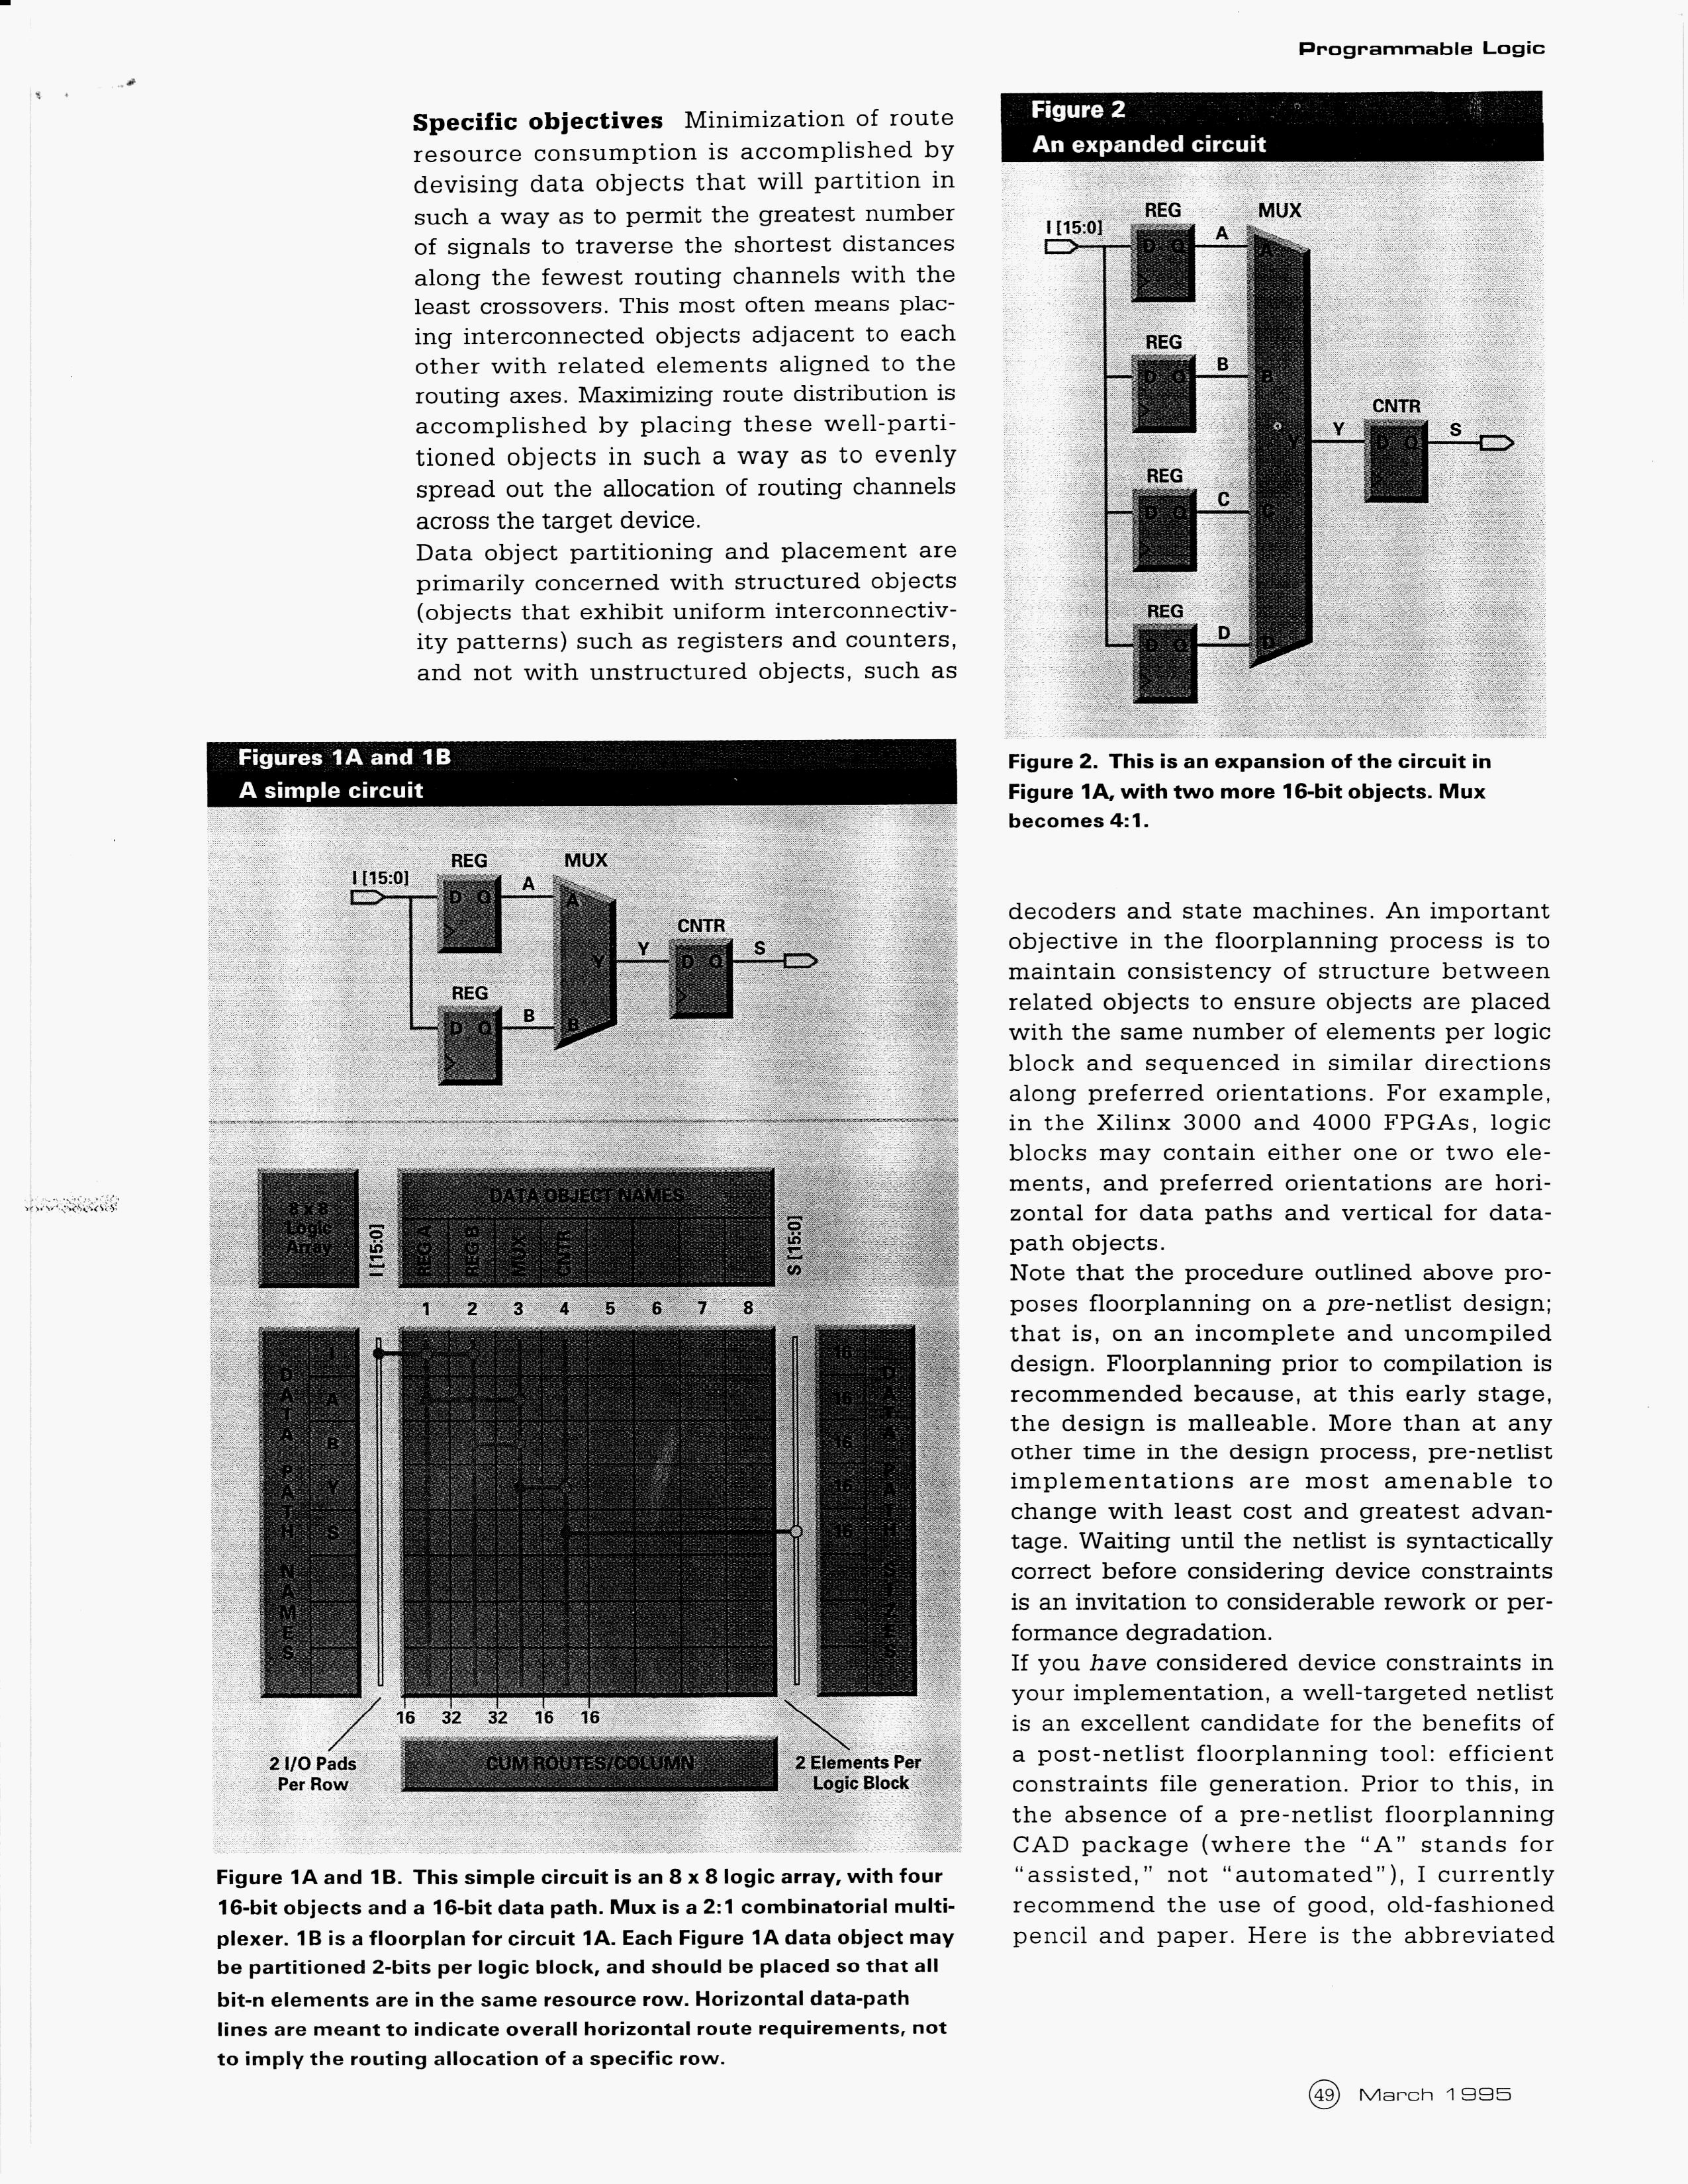 * Floorplanning for High-Performance FPGA Designs, Stephen Wasson, March 1995, Integrated System Design page 2 *